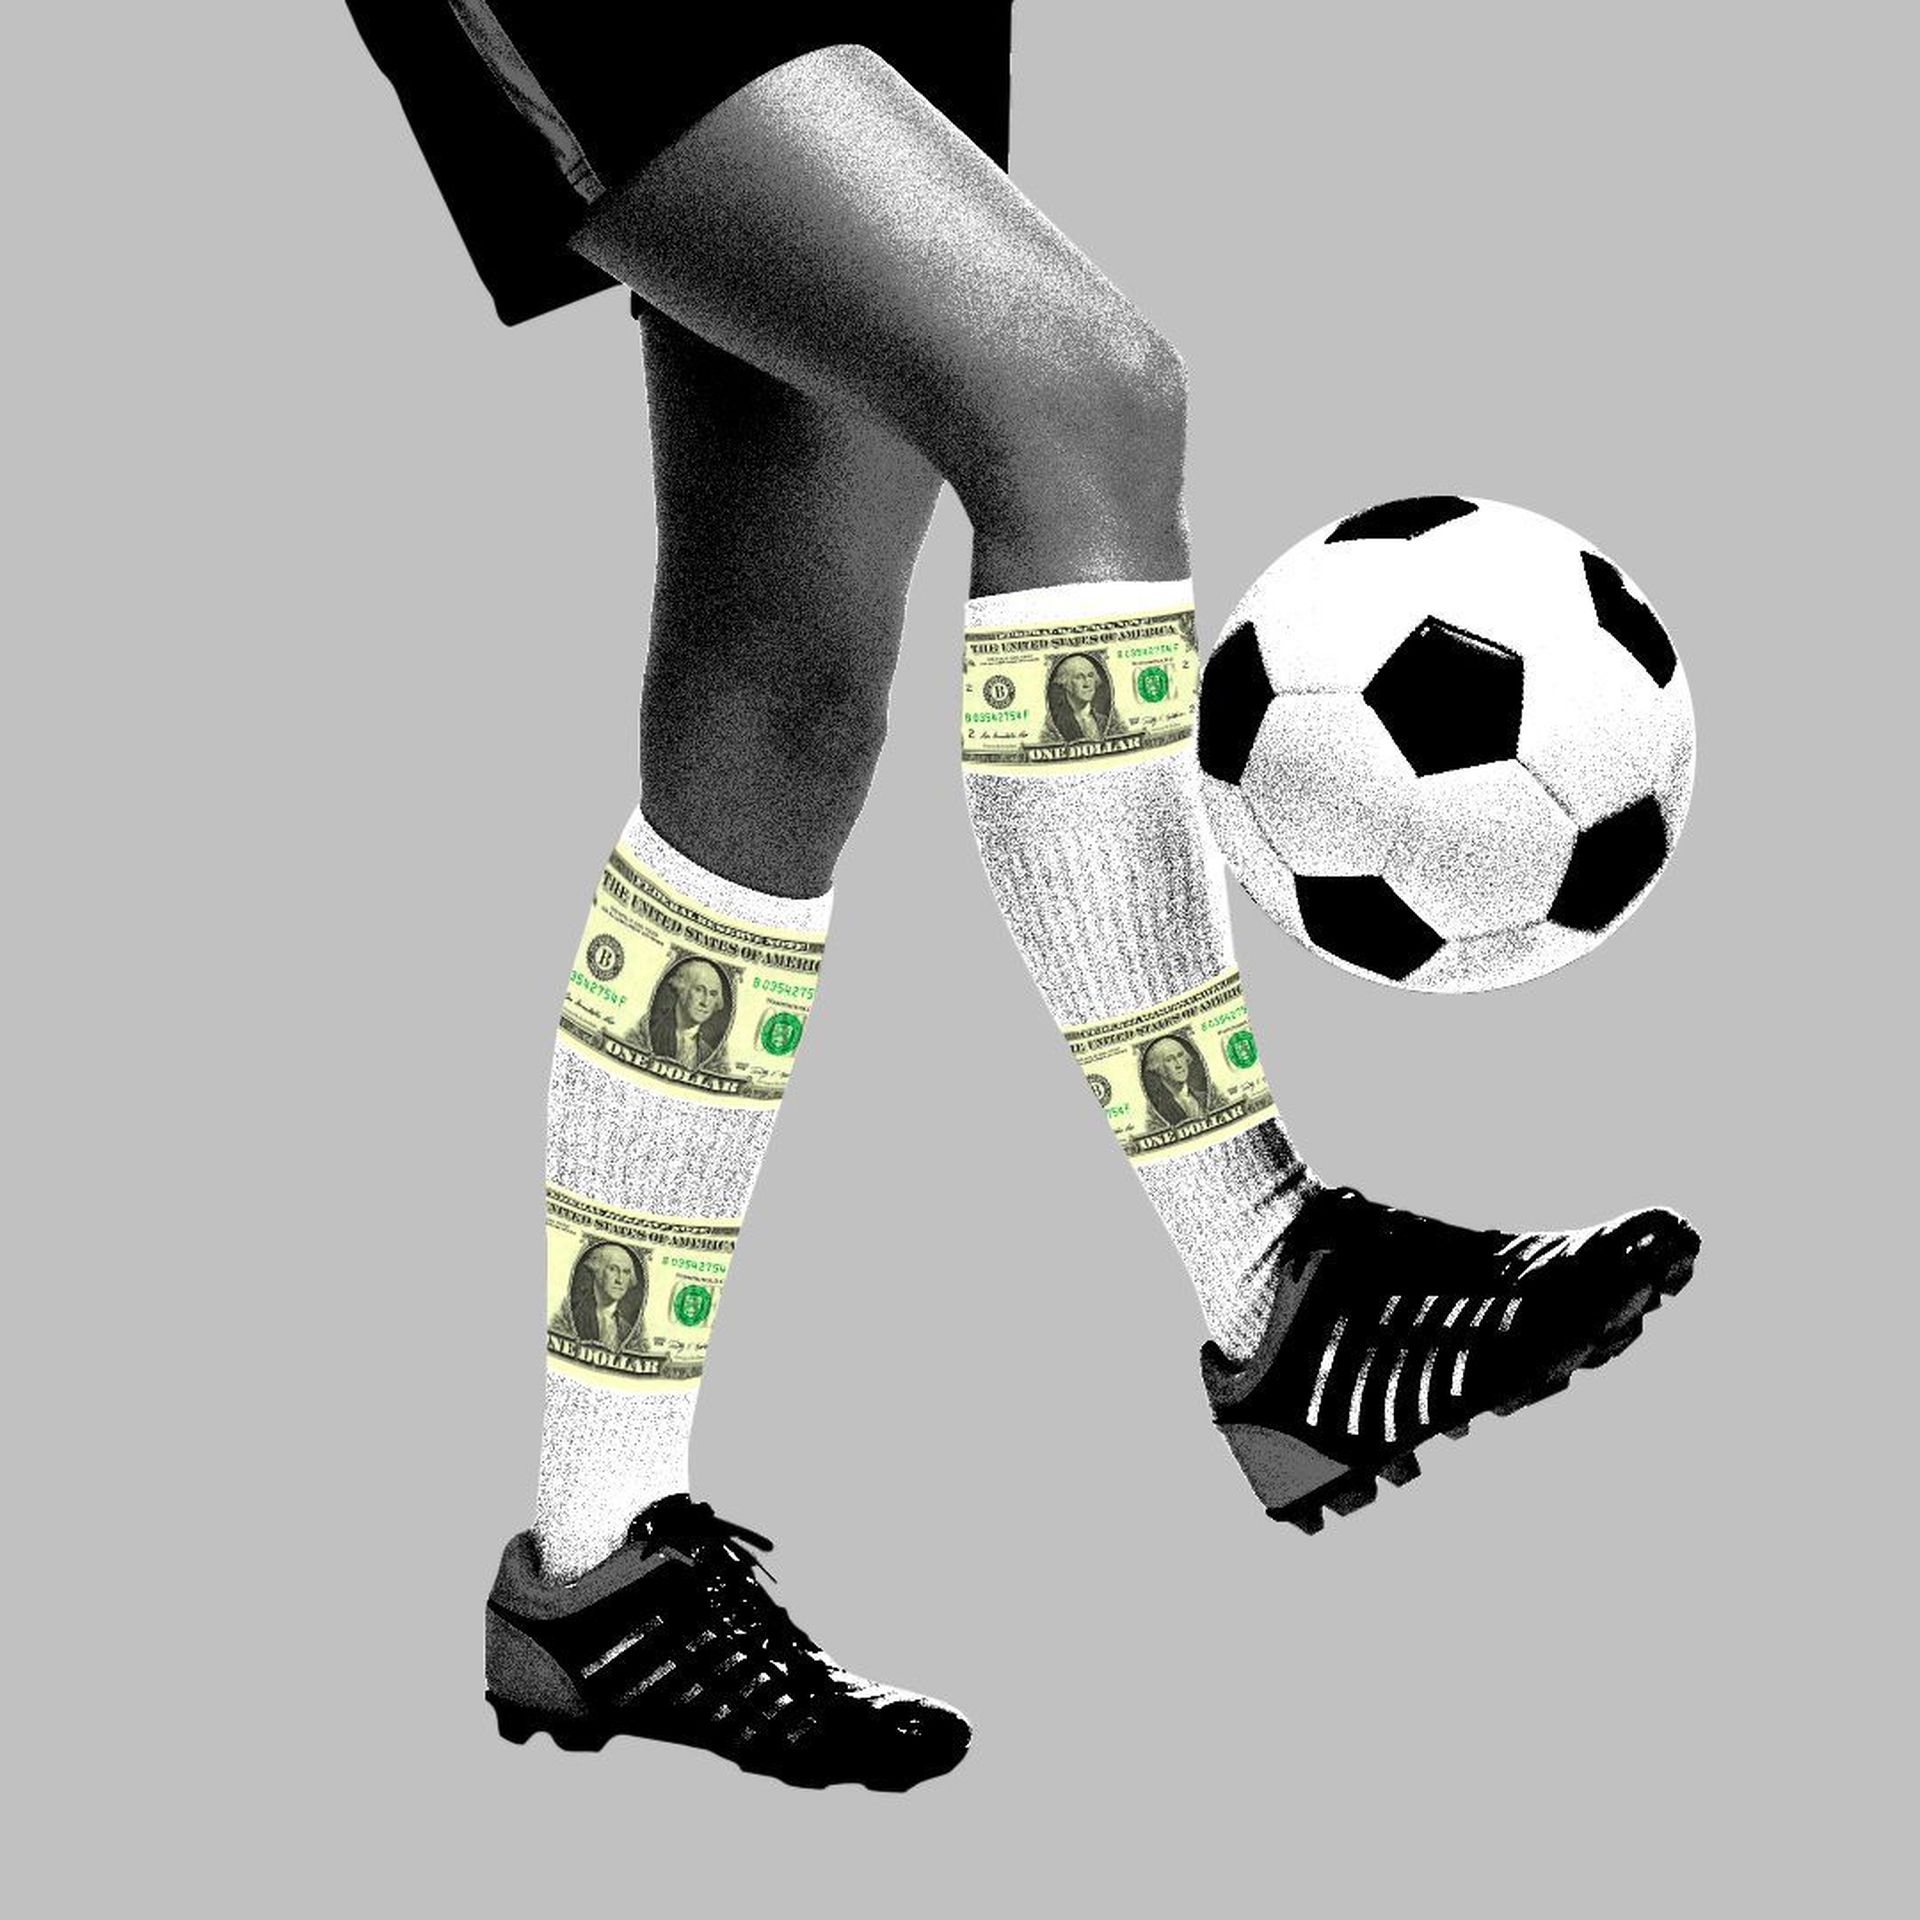 In this illustration, a soccer ball is kicked by someone wearing sports gear and socks with money printed on them.